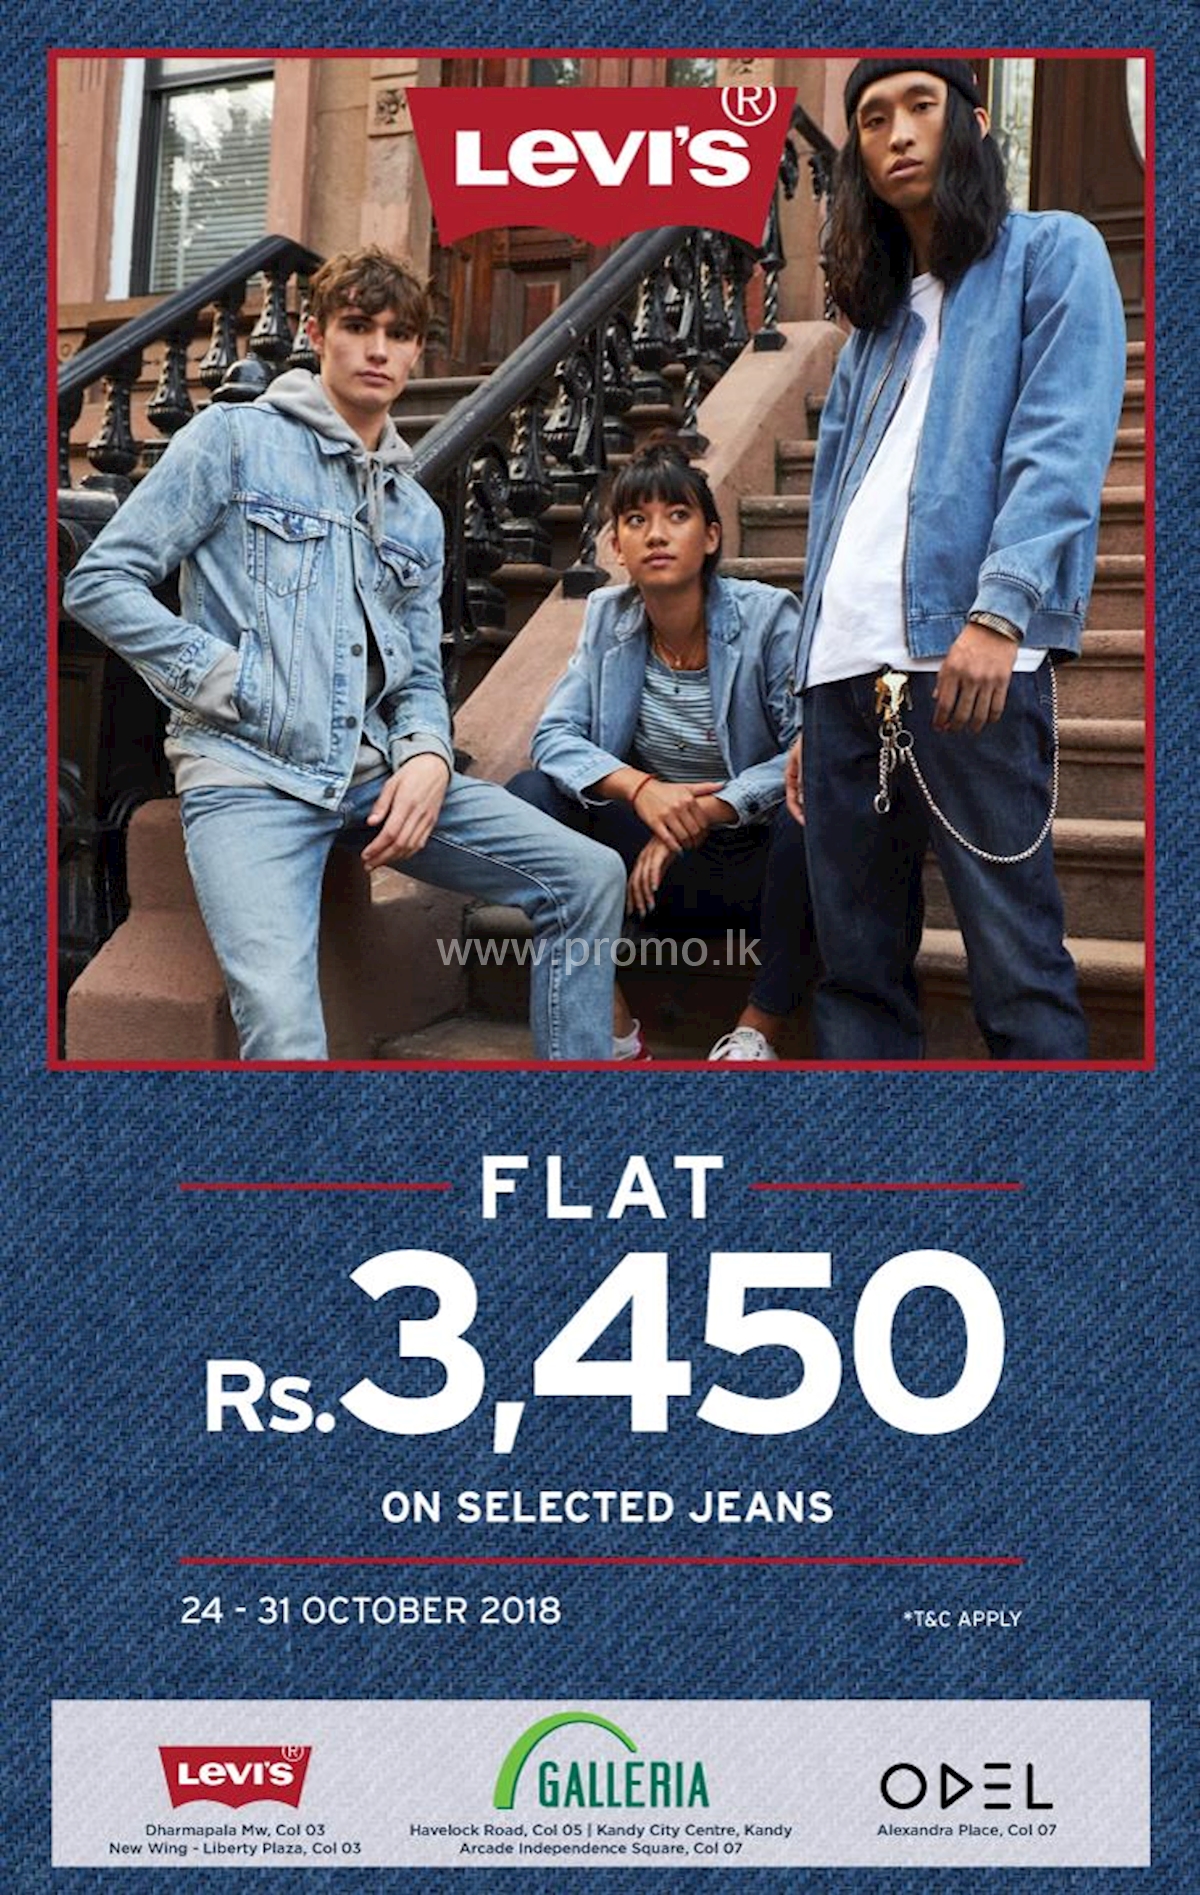 Get Levis Jeans at a Flat rate of Rs.3,450/-